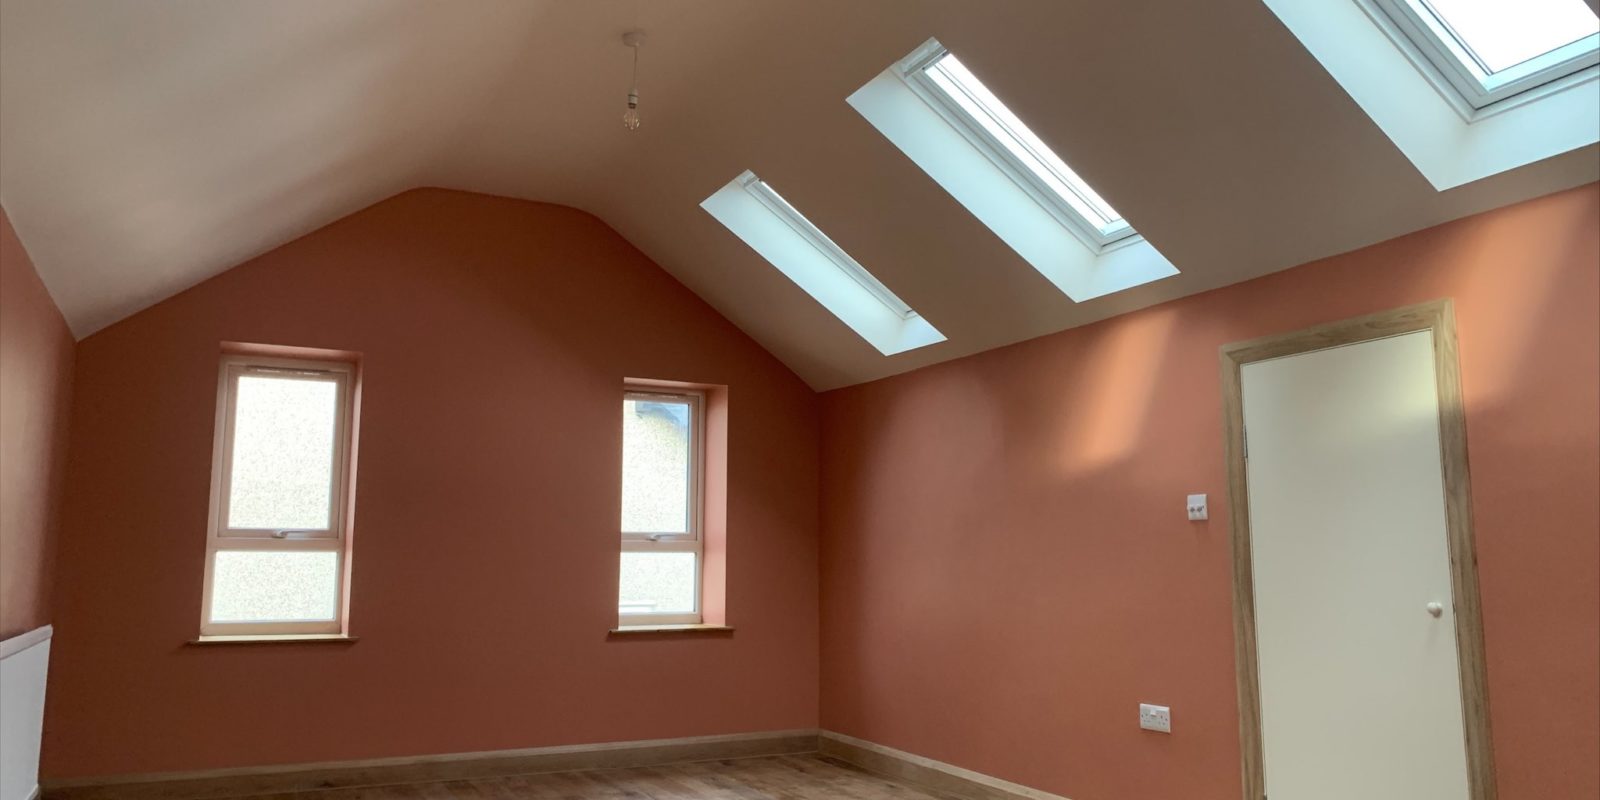 Loft conversion to luxurious guest bedroom